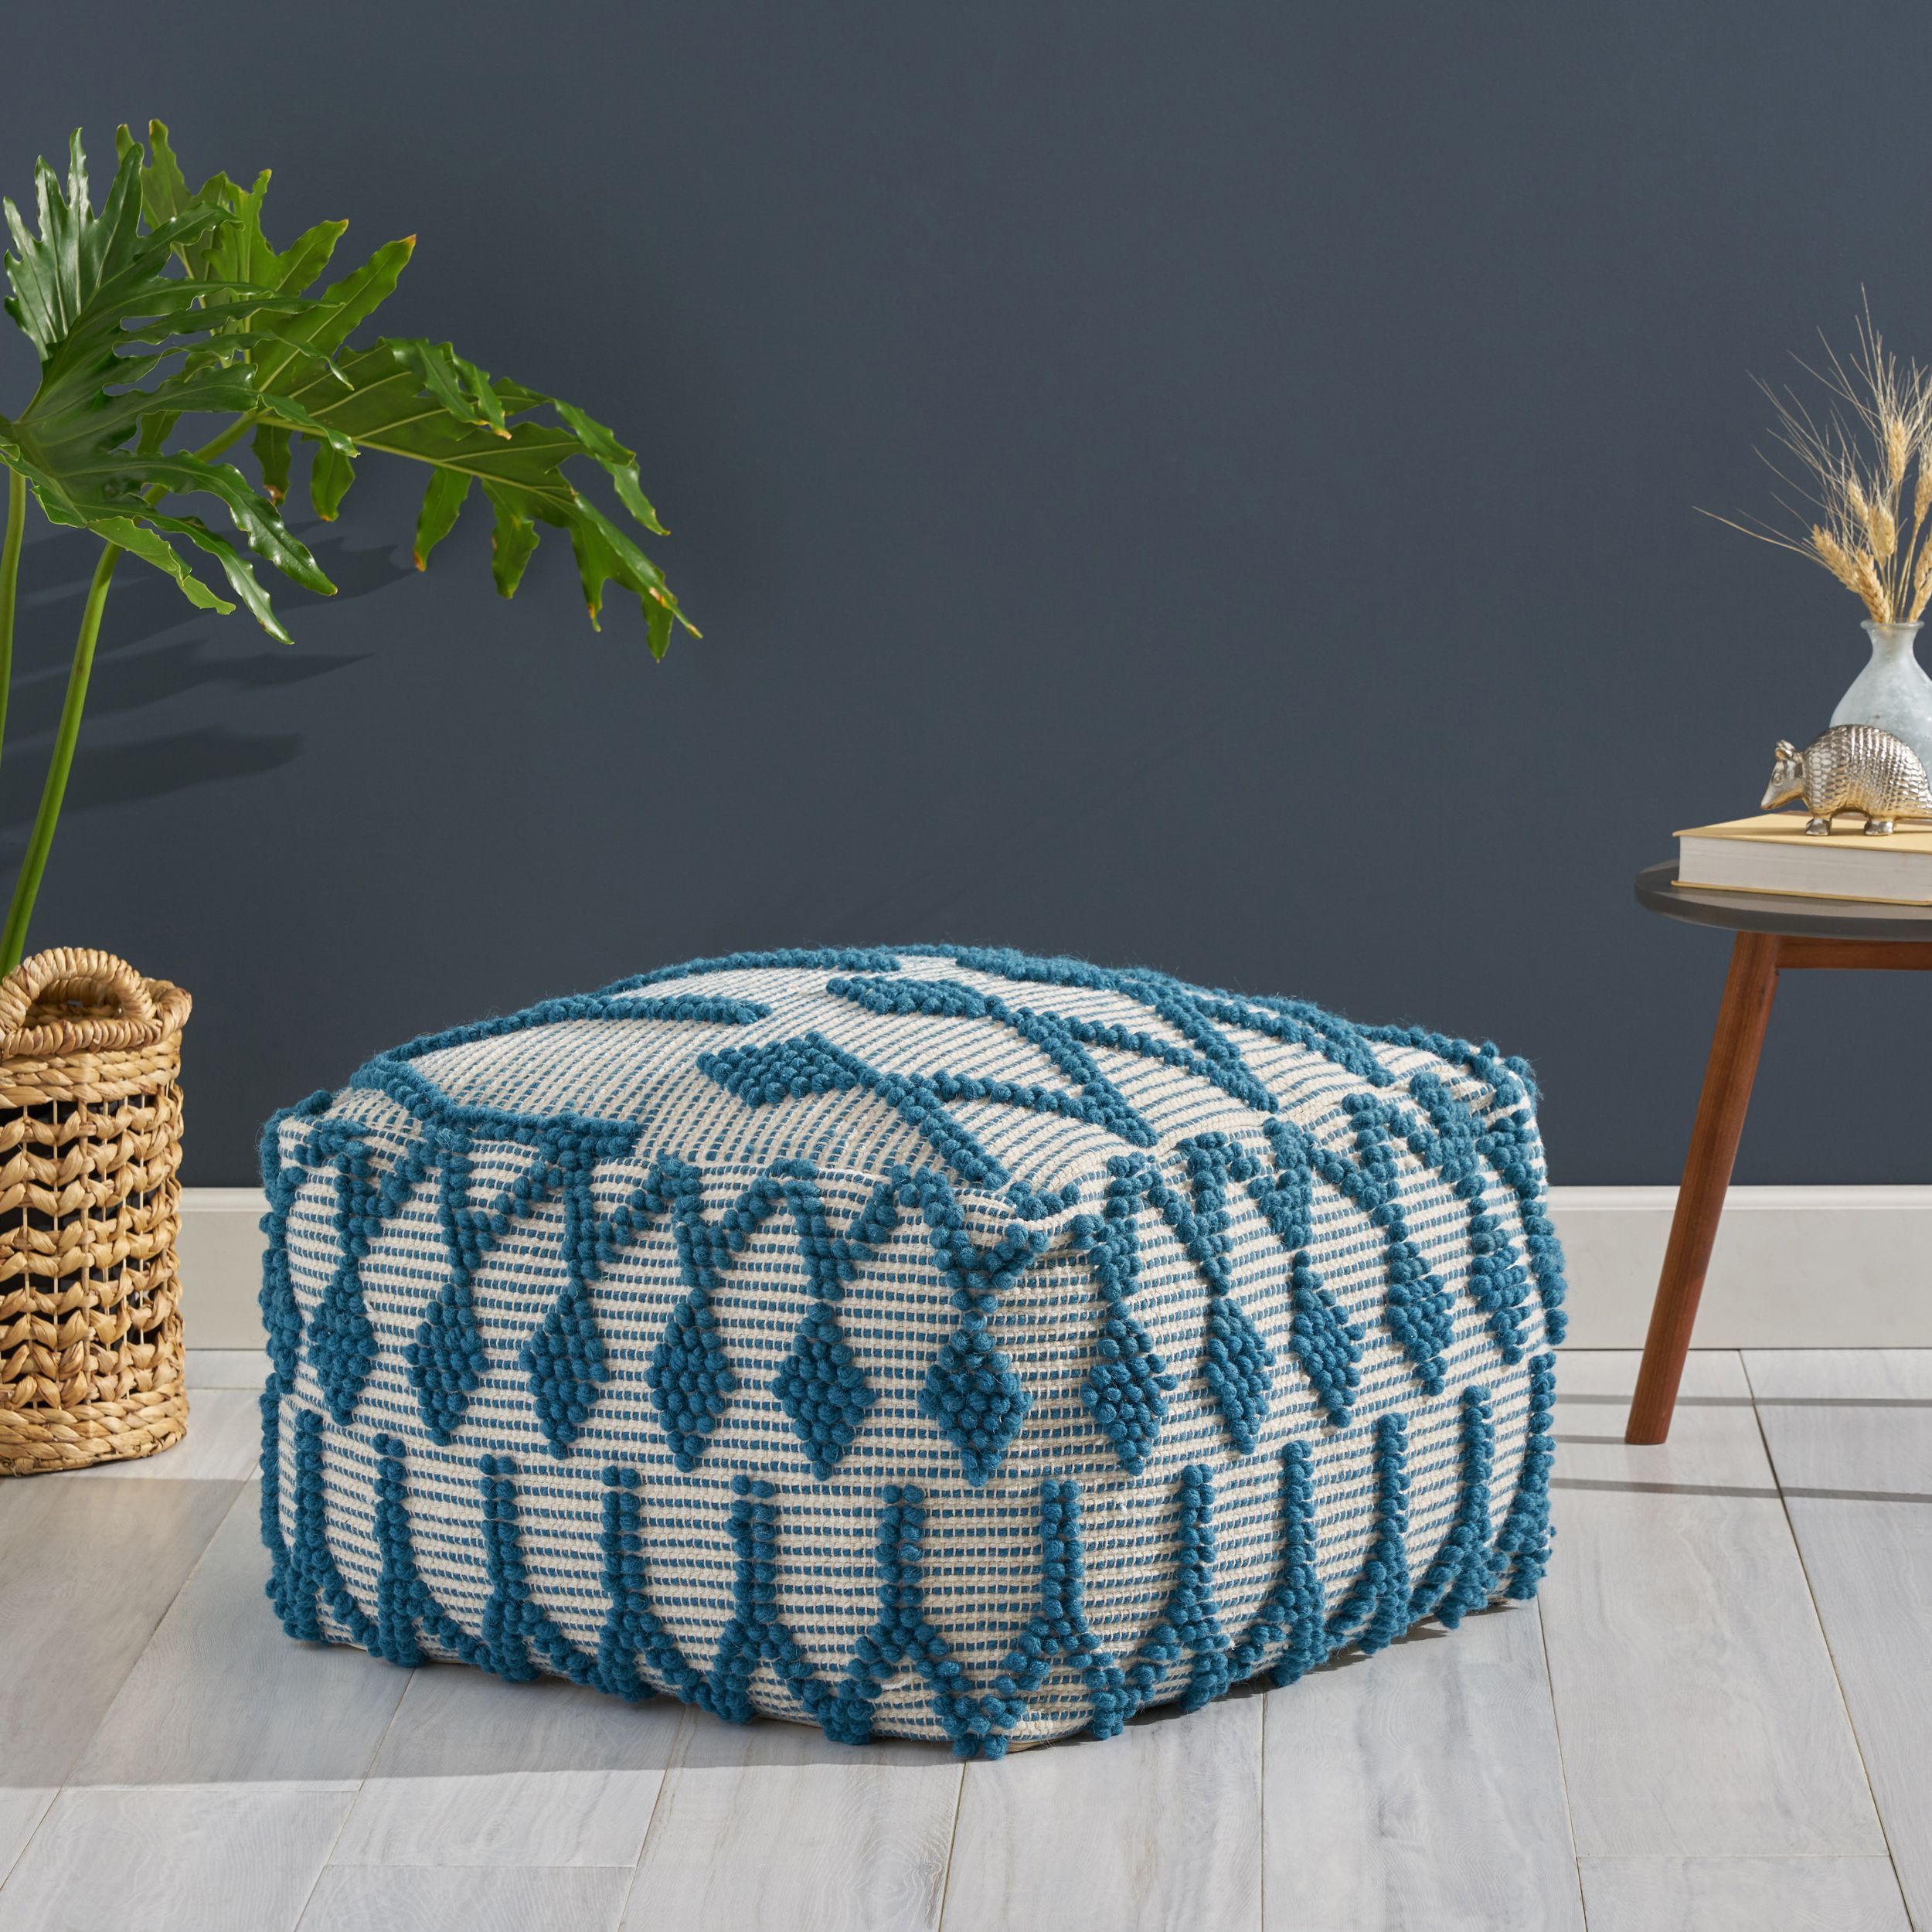 Noble House Liliana Boho Wool And Cotton Large Ottoman Pouf, Teal And With Regard To Most Current Charcoal And White Wool Pouf Ottomans (View 4 of 10)